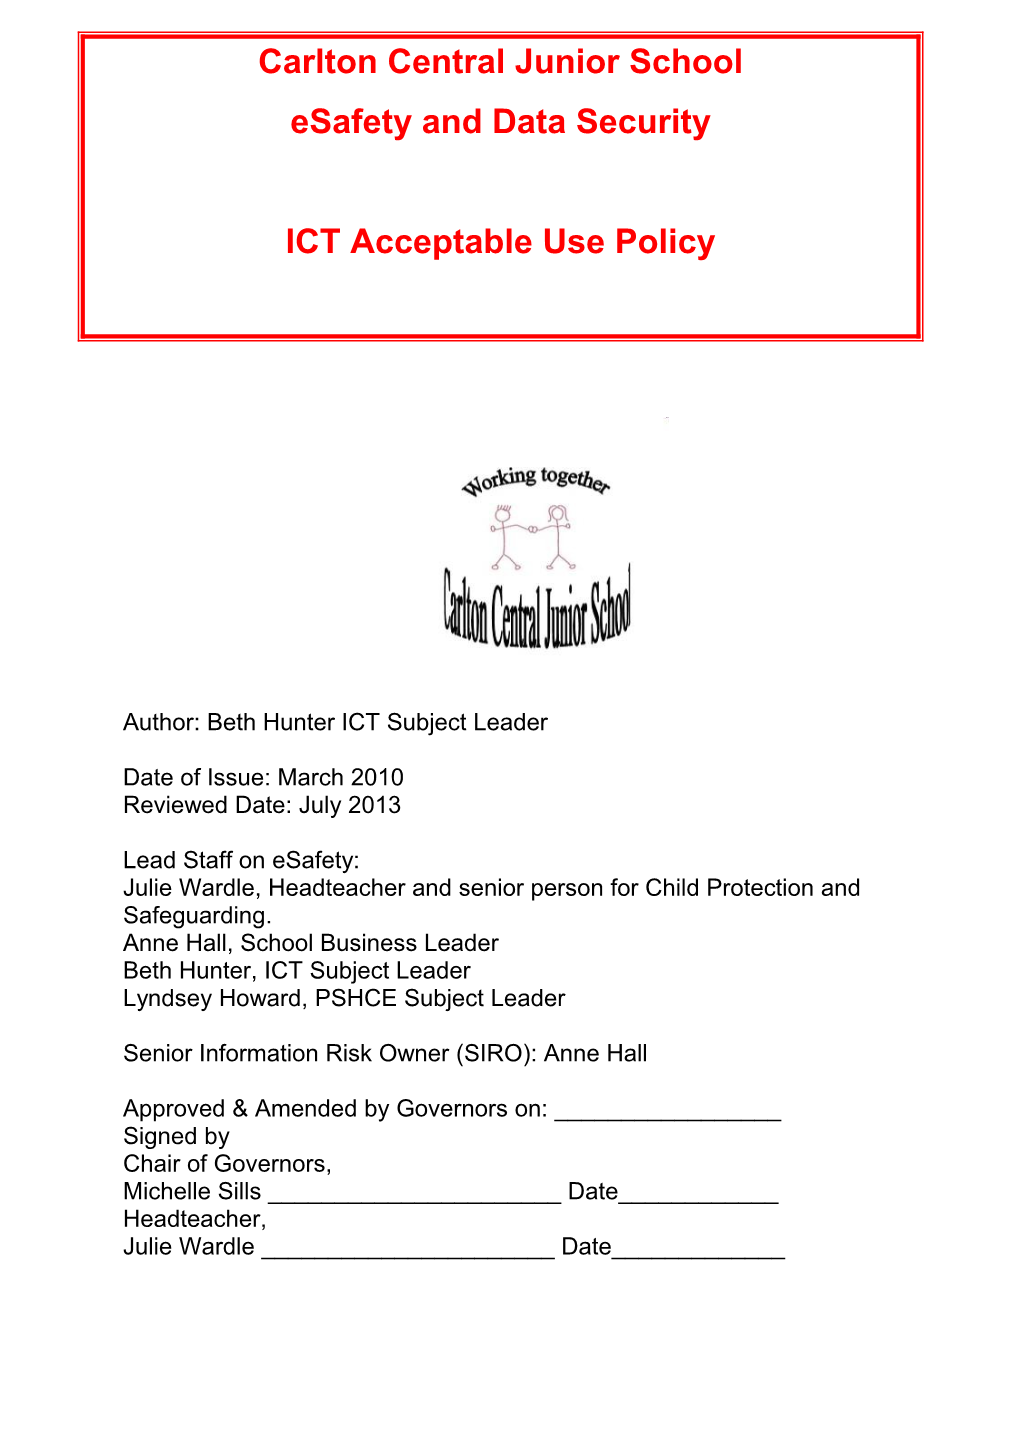 CSF0137 Model School Policy for ICT Acceptable Use Incorporating Esafety and Data Security